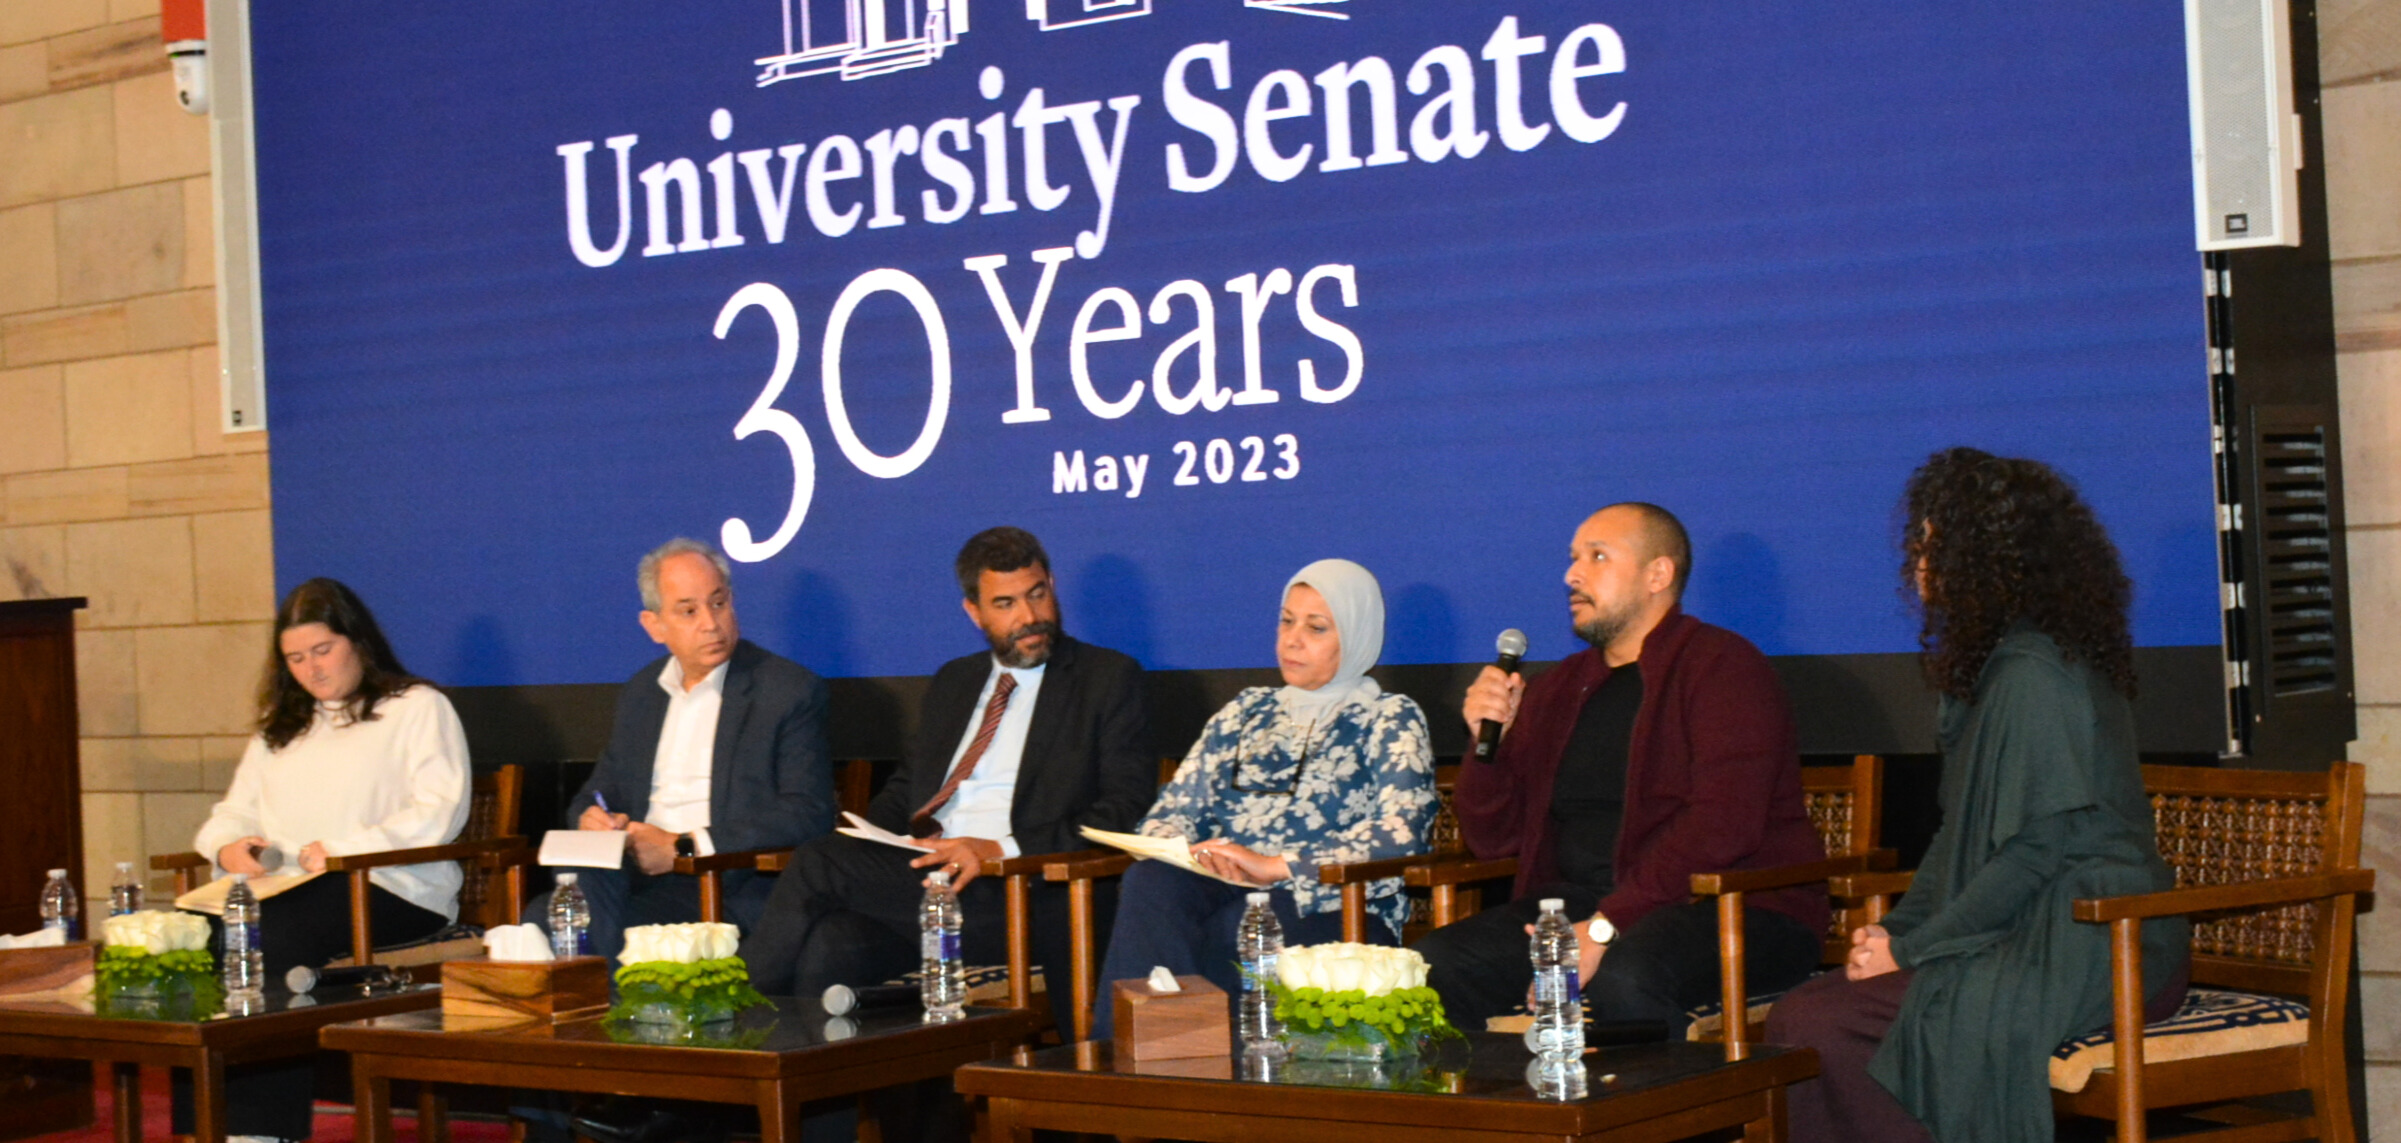 A panel discussion at the celebration ceremony